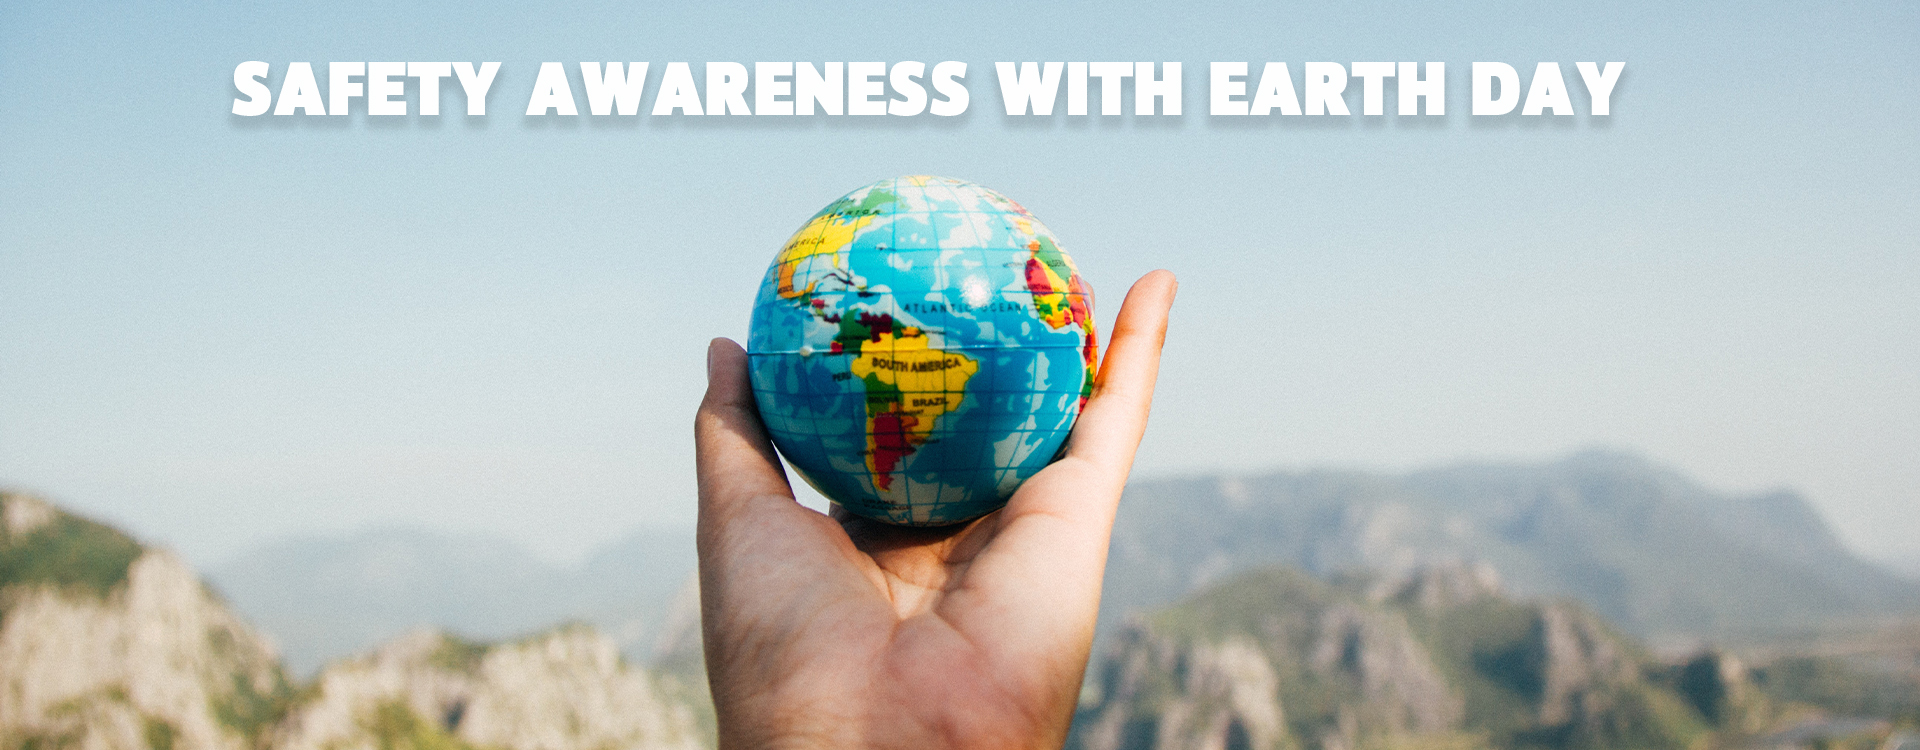 gifts suppliers creative product about safety awareness with earth day